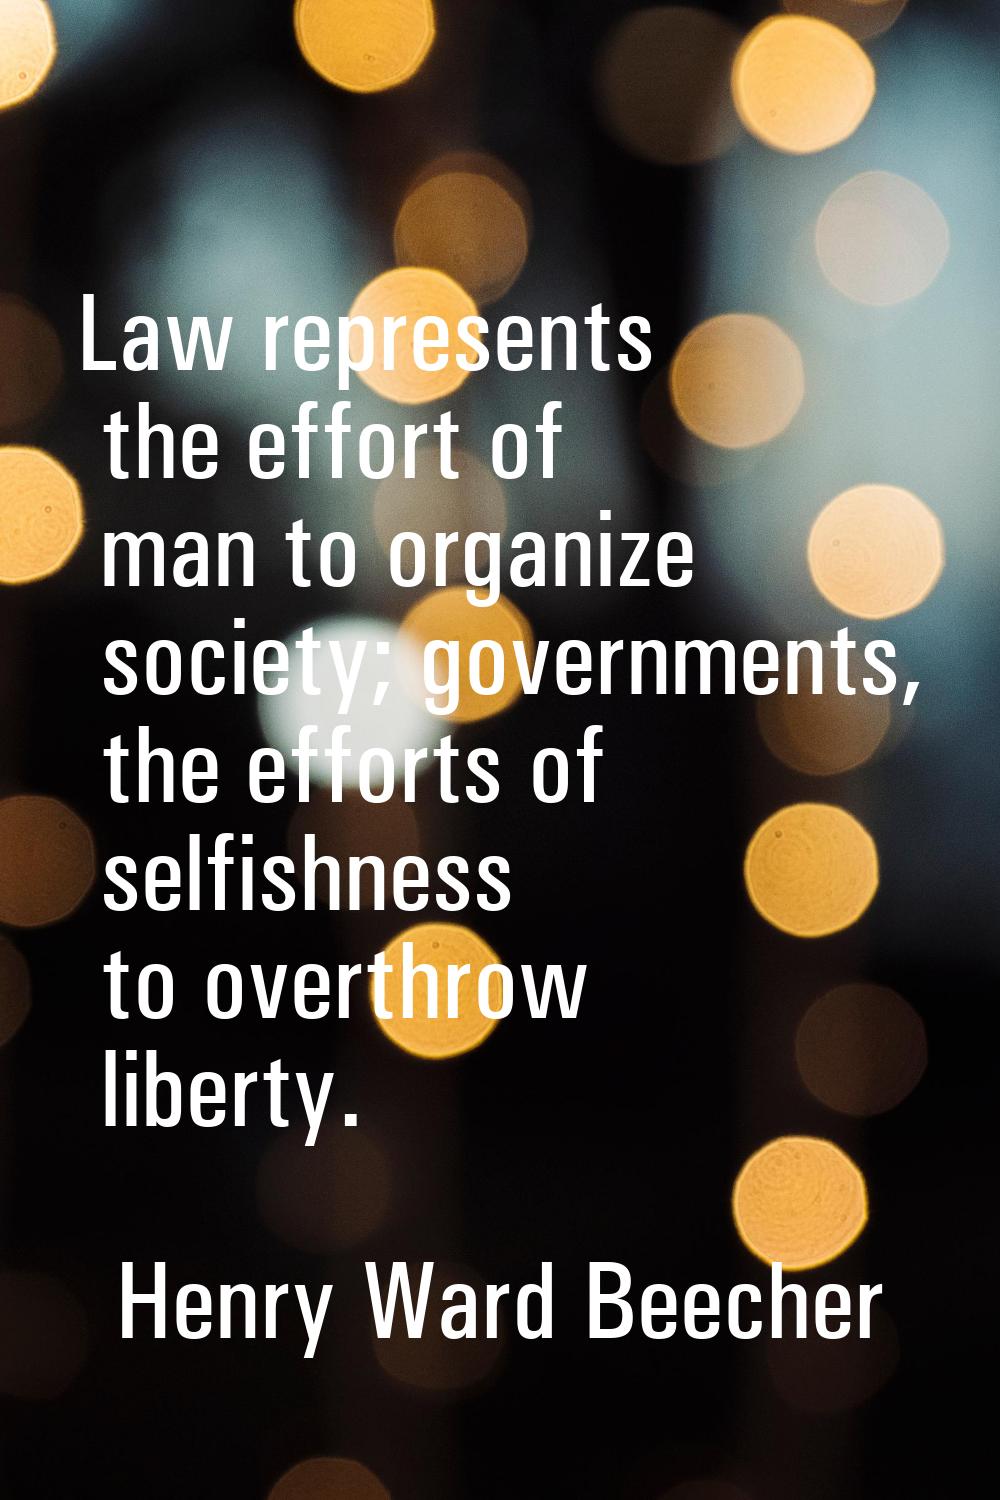 Law represents the effort of man to organize society; governments, the efforts of selfishness to ov